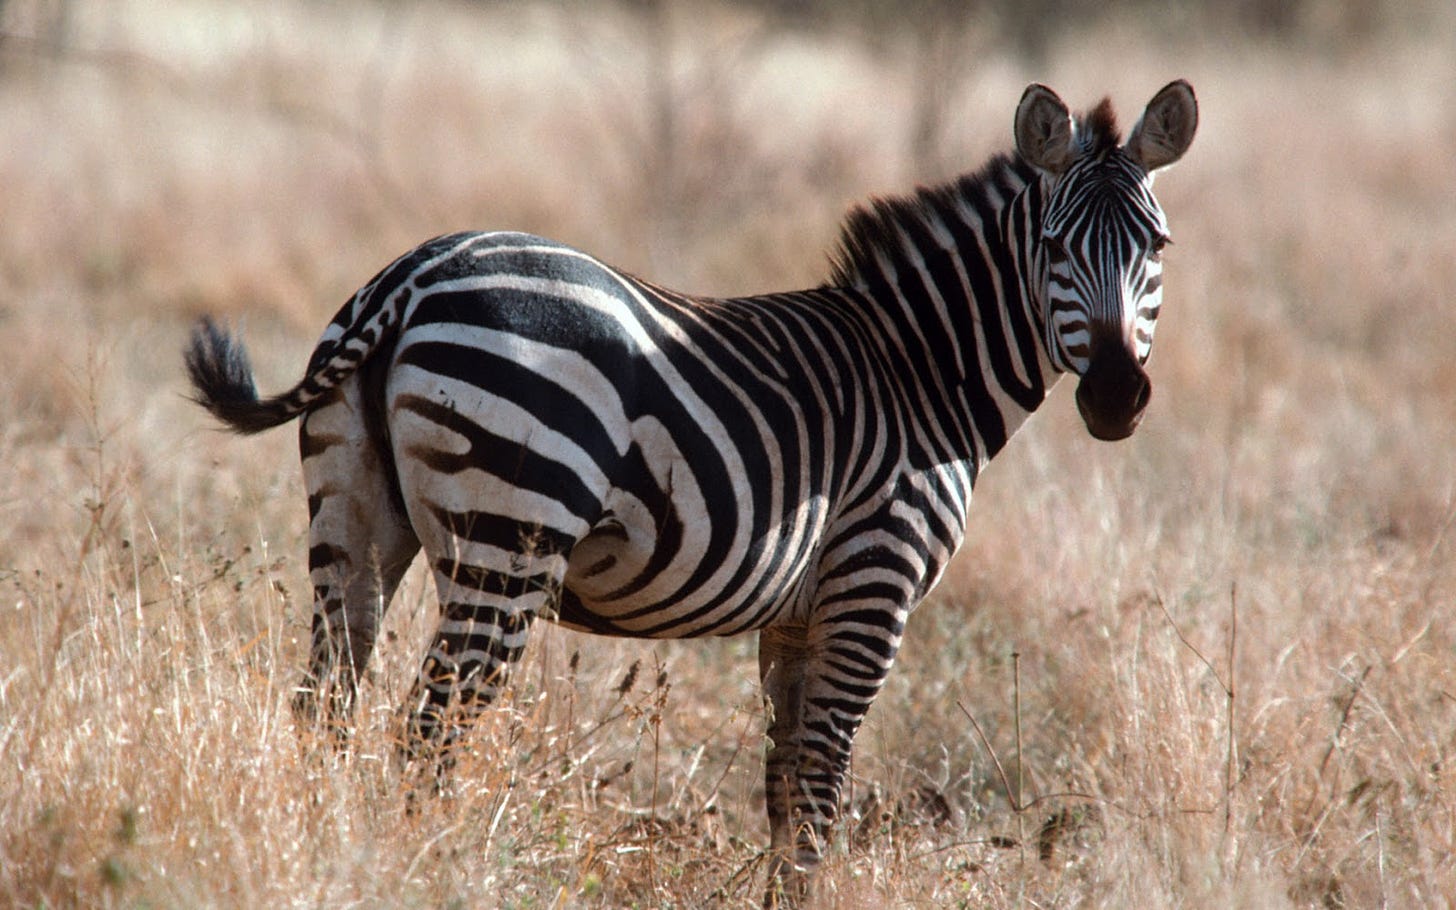 Zebras Lovely Hd Pictures/Wallpapers 2013 | Beautiful And Dangerous ...